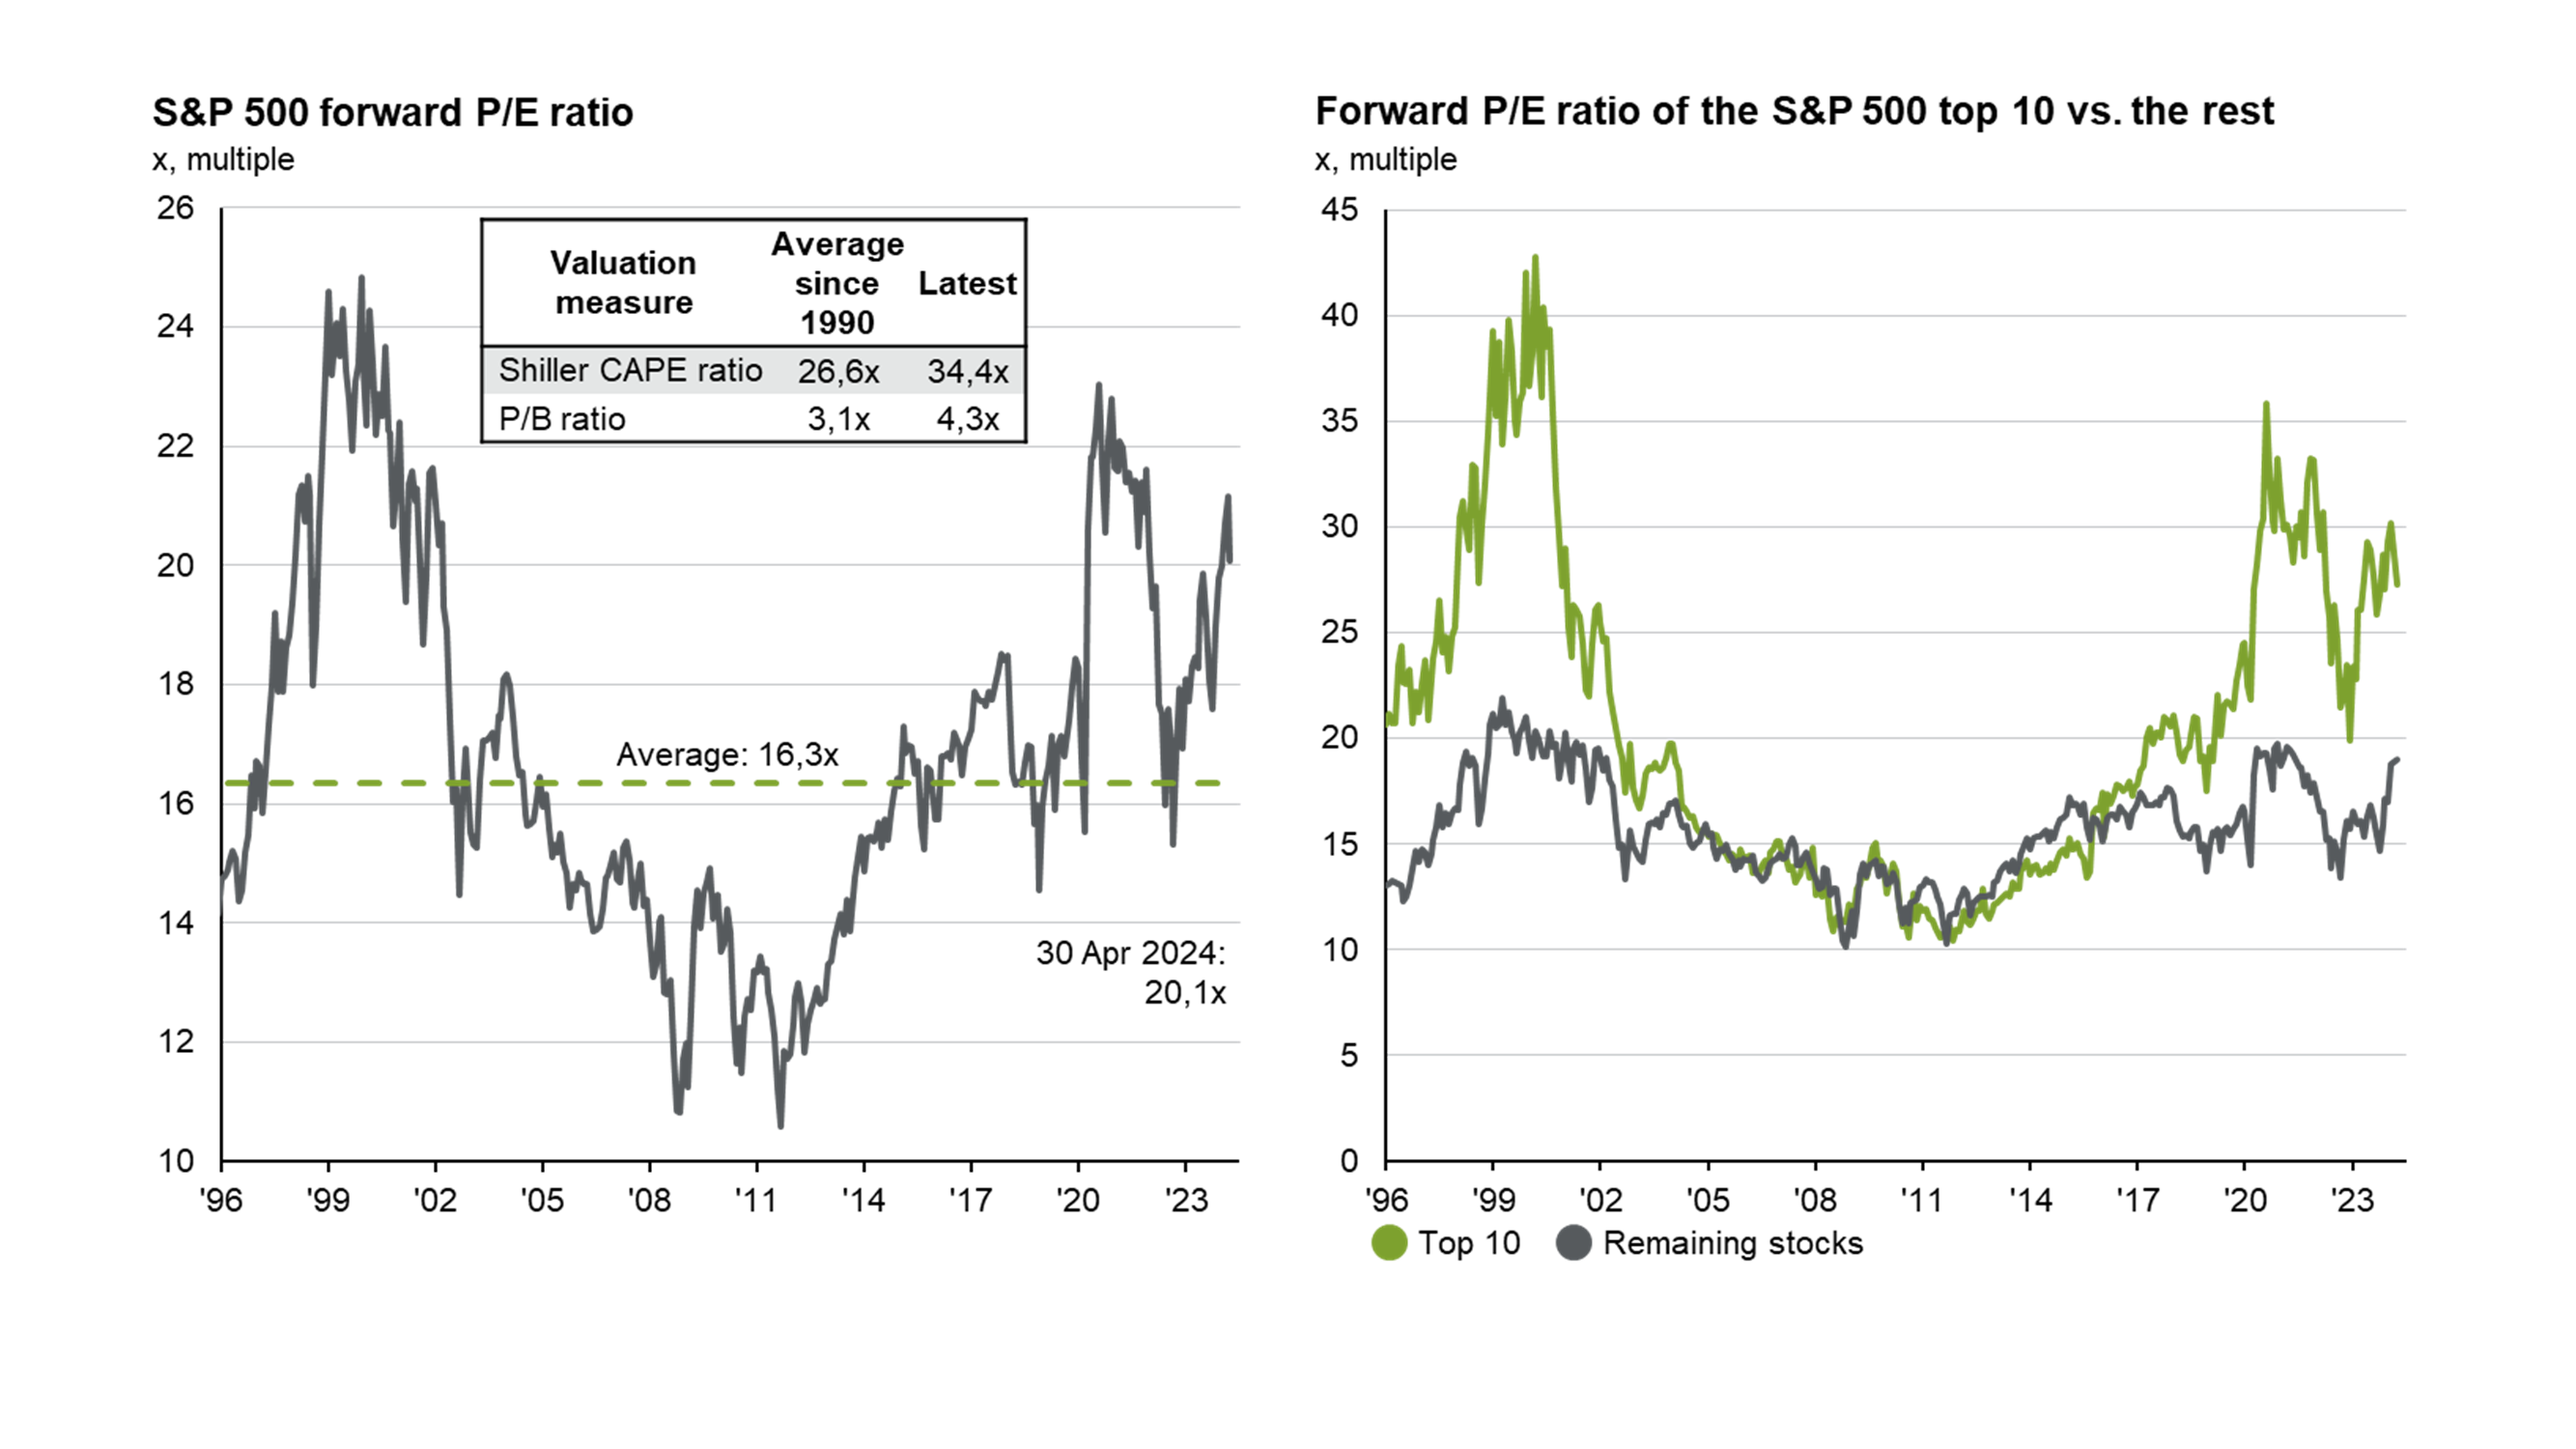 US valuations and subsequent returns